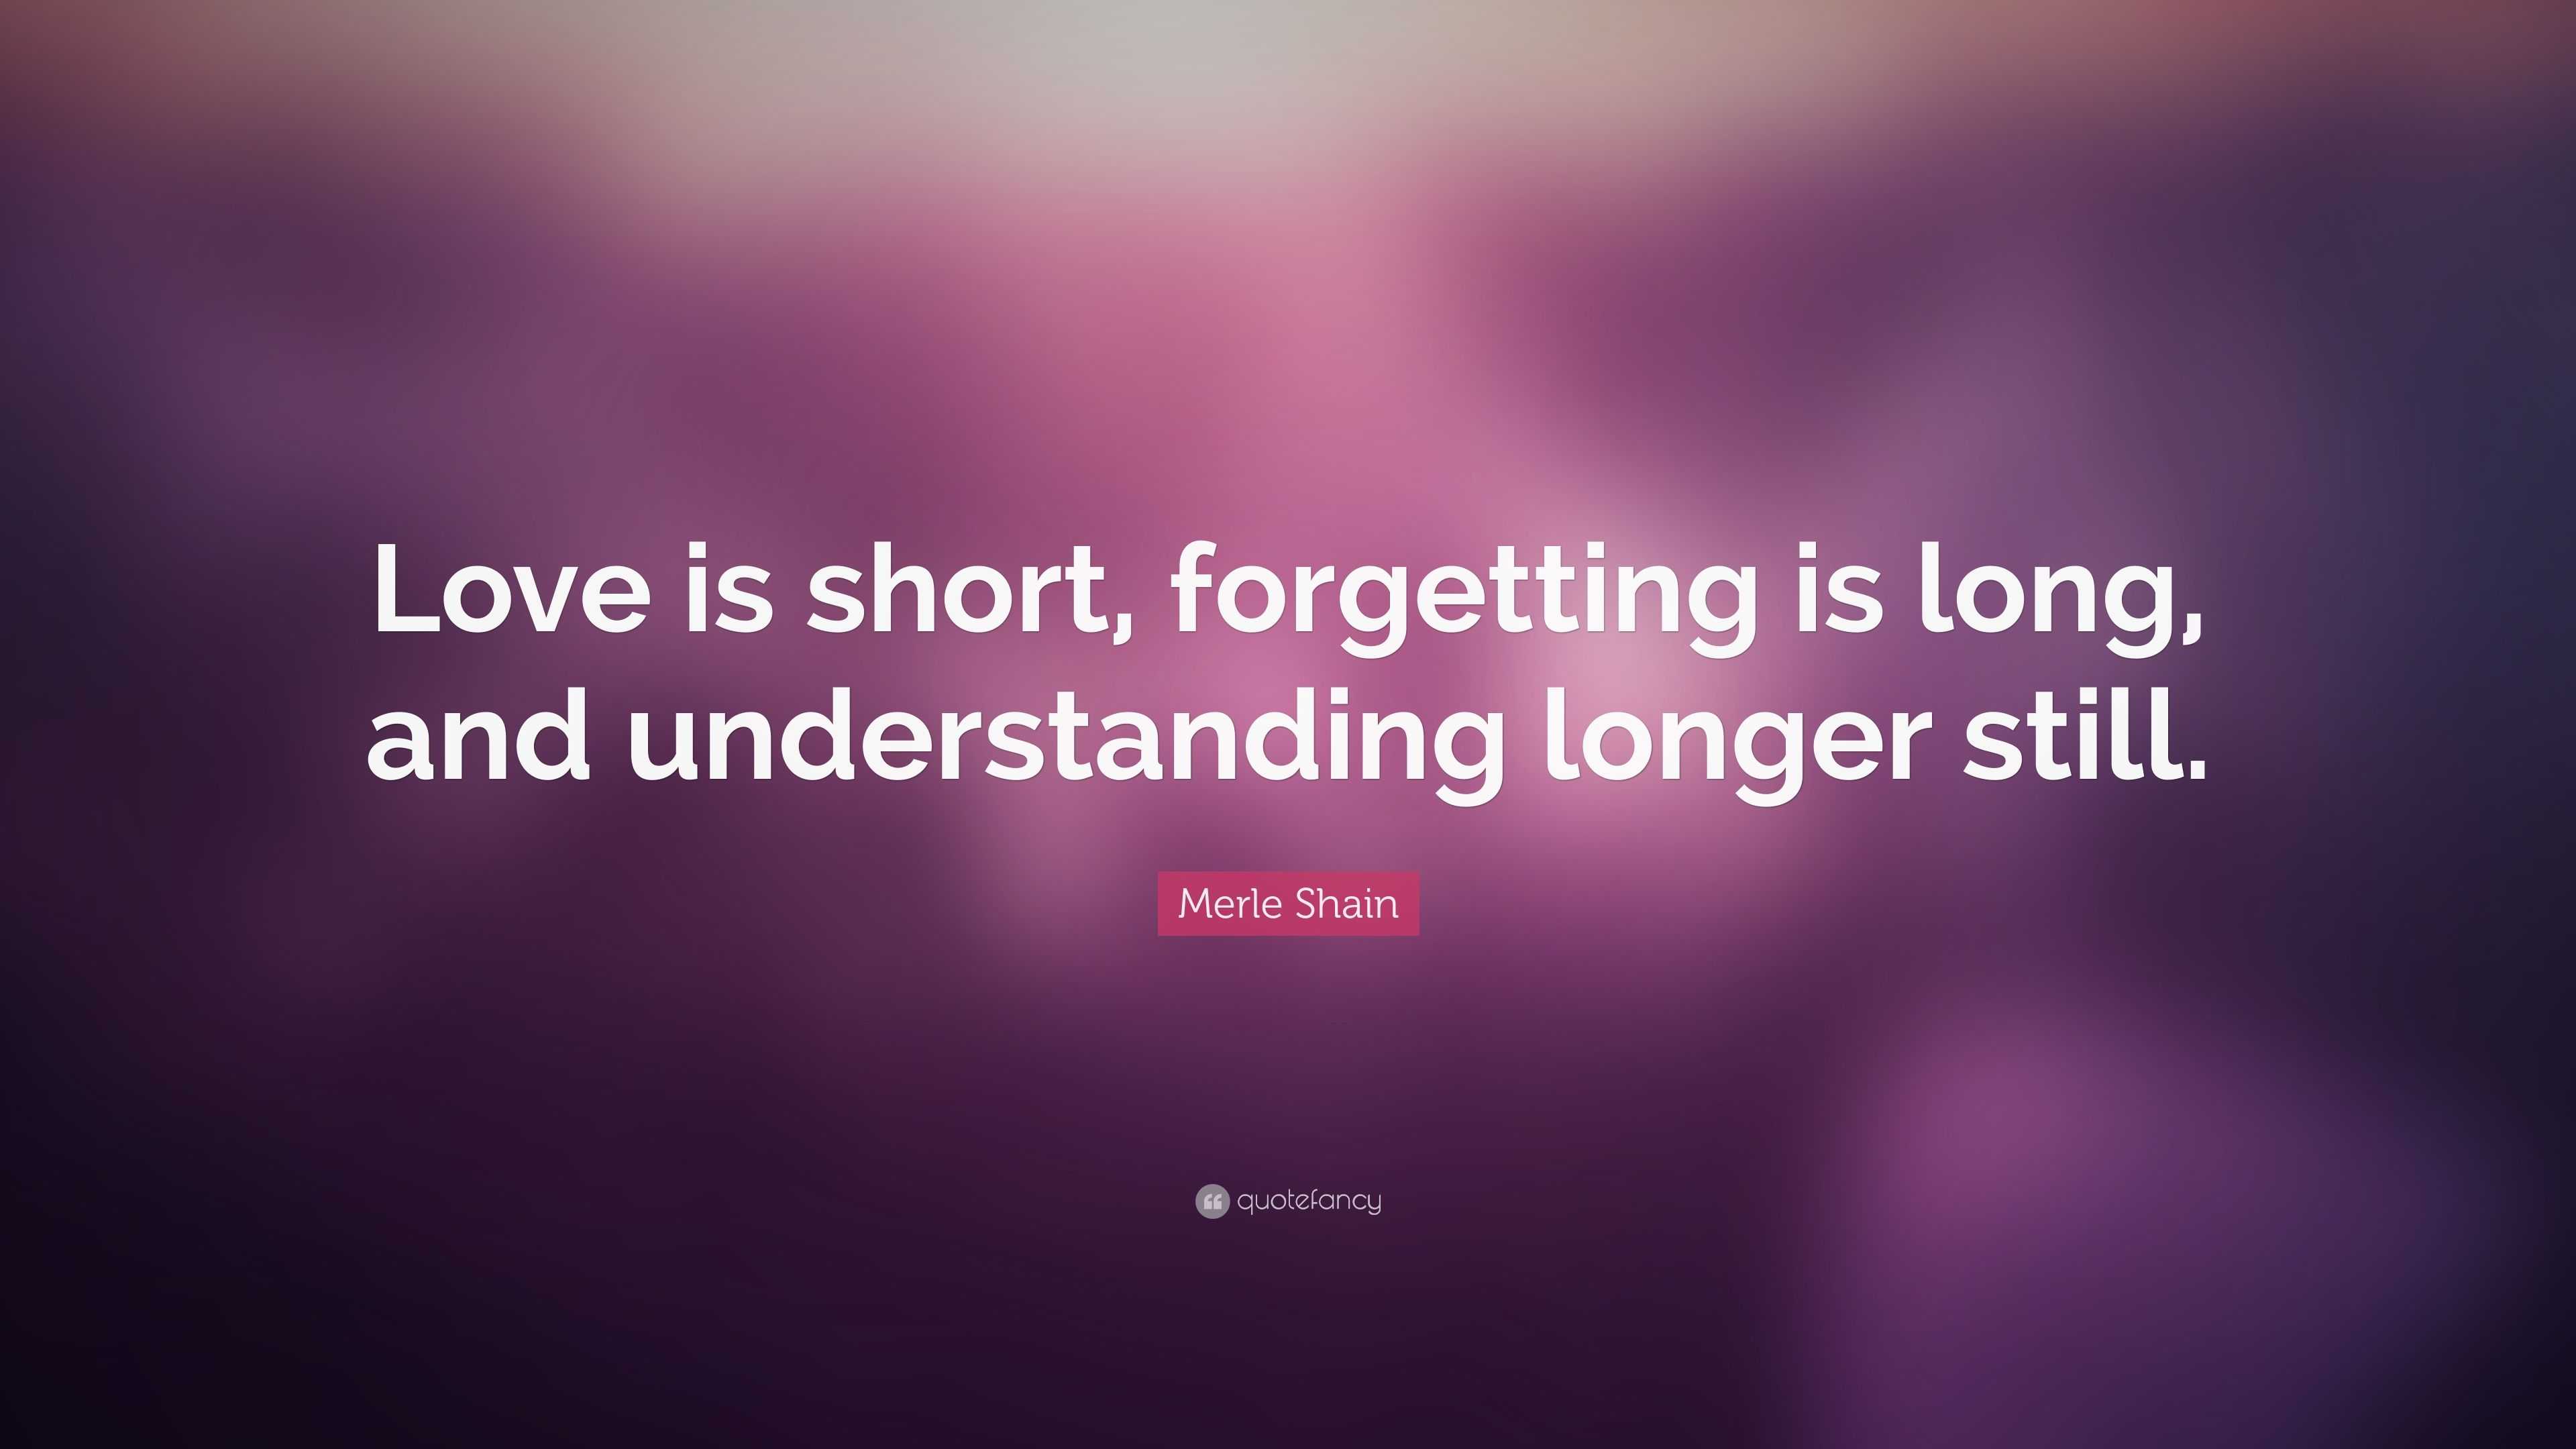 Merle Shain Quote: “Love is short, forgetting is long, and ...